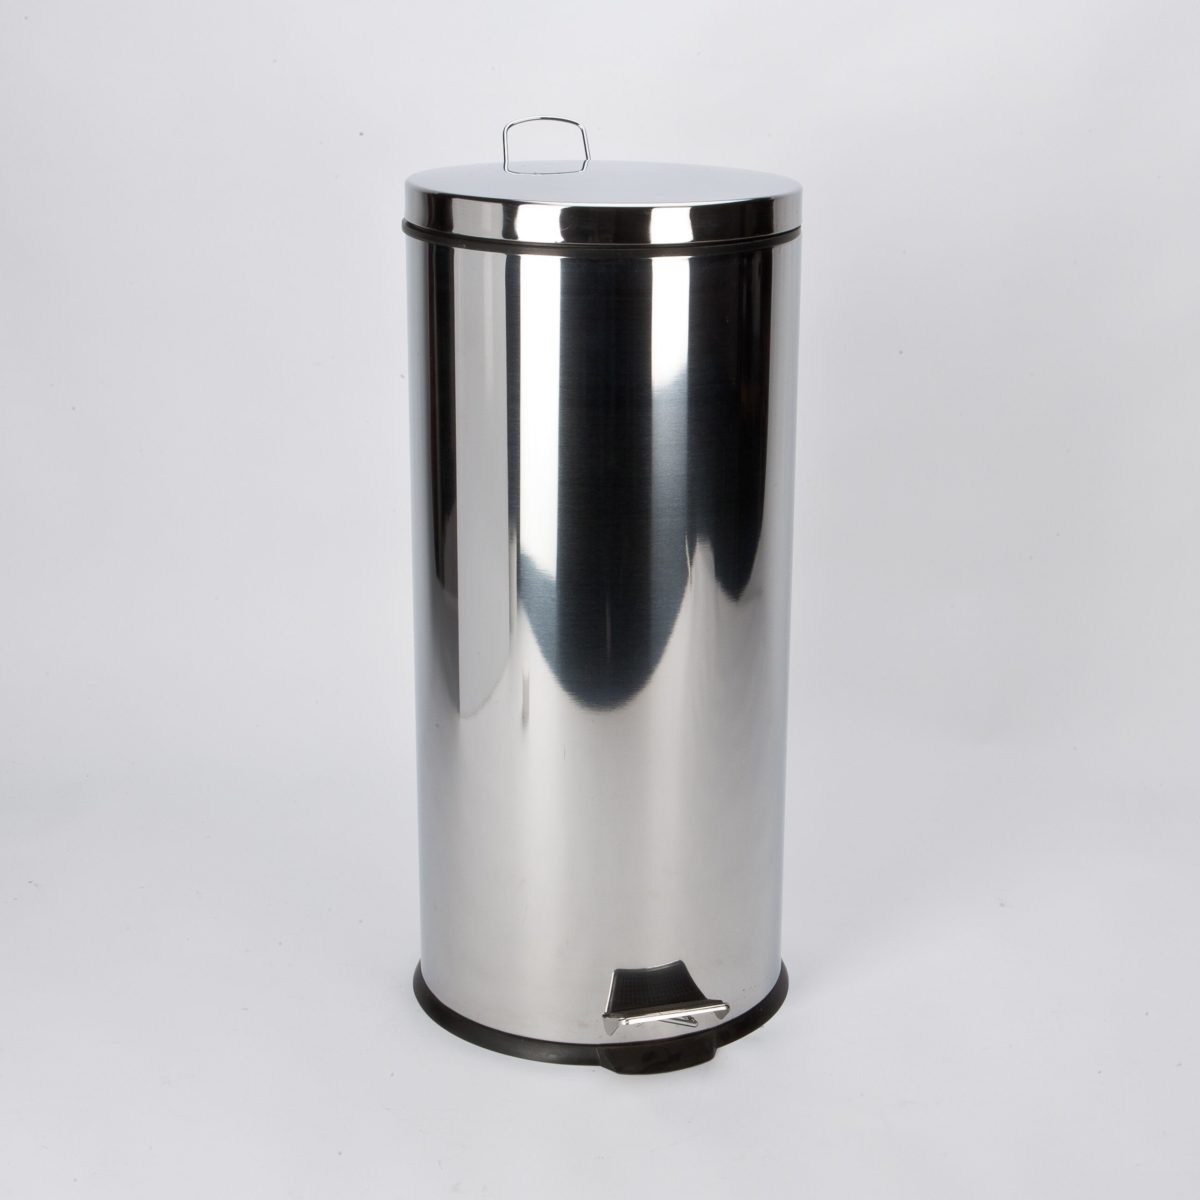 30 Litre Stainless Steel Kitchen Bin - Wholesale Prices